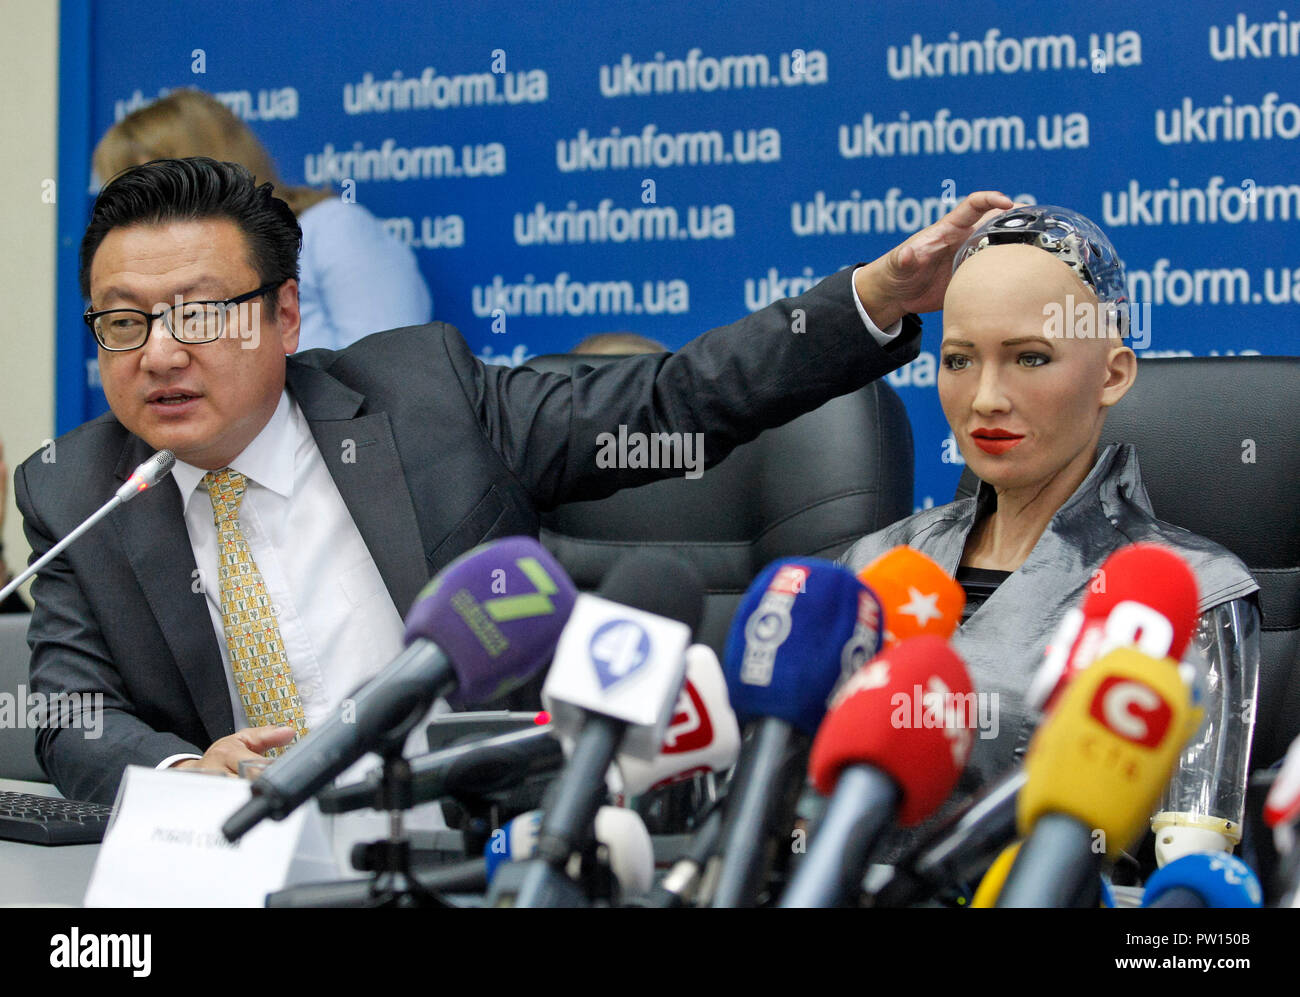 The humanoid robot Sophia (R) and the Sophia's creator and Director and  Chief Financial Officer of Hanson Robotics David Chen (L) seen take part a  press conference in Kiev. The robot Sophia